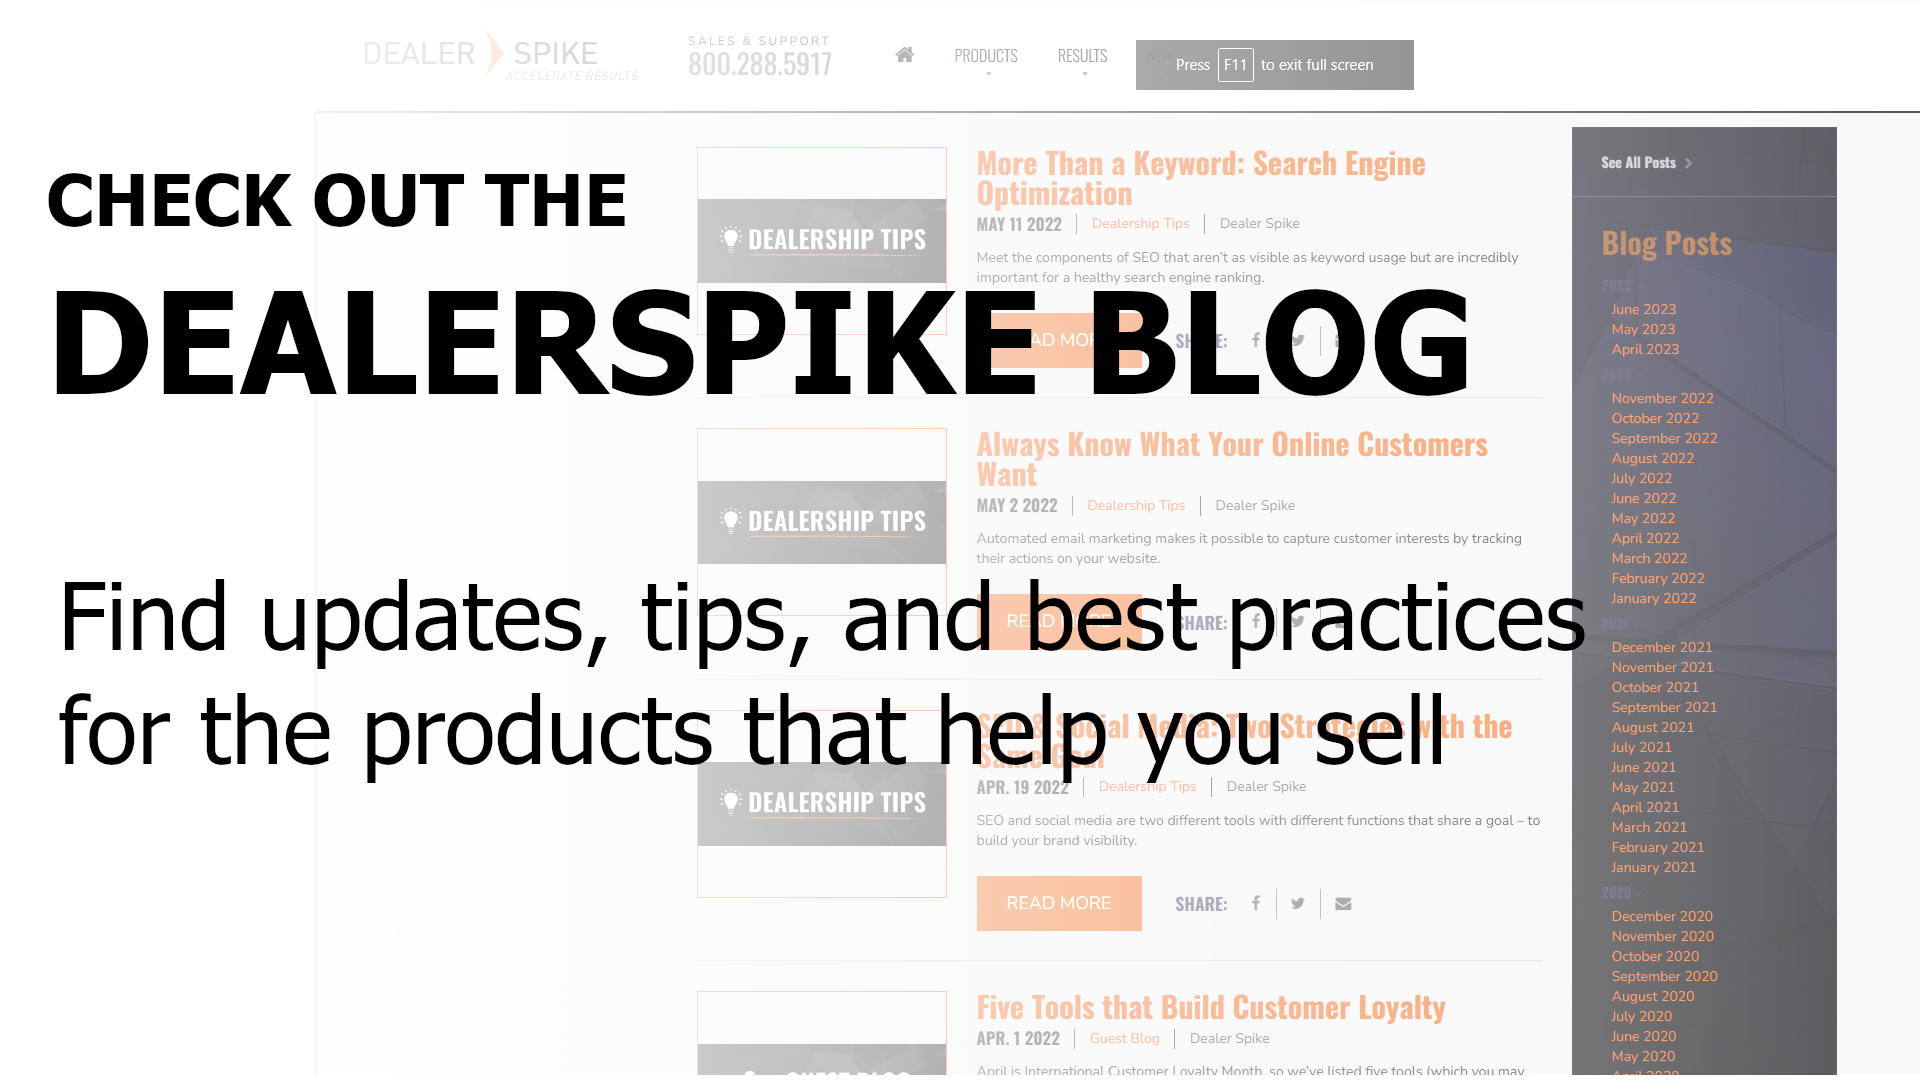 Click to brouse the Dealerspike Blog for updates, tips and best practices.